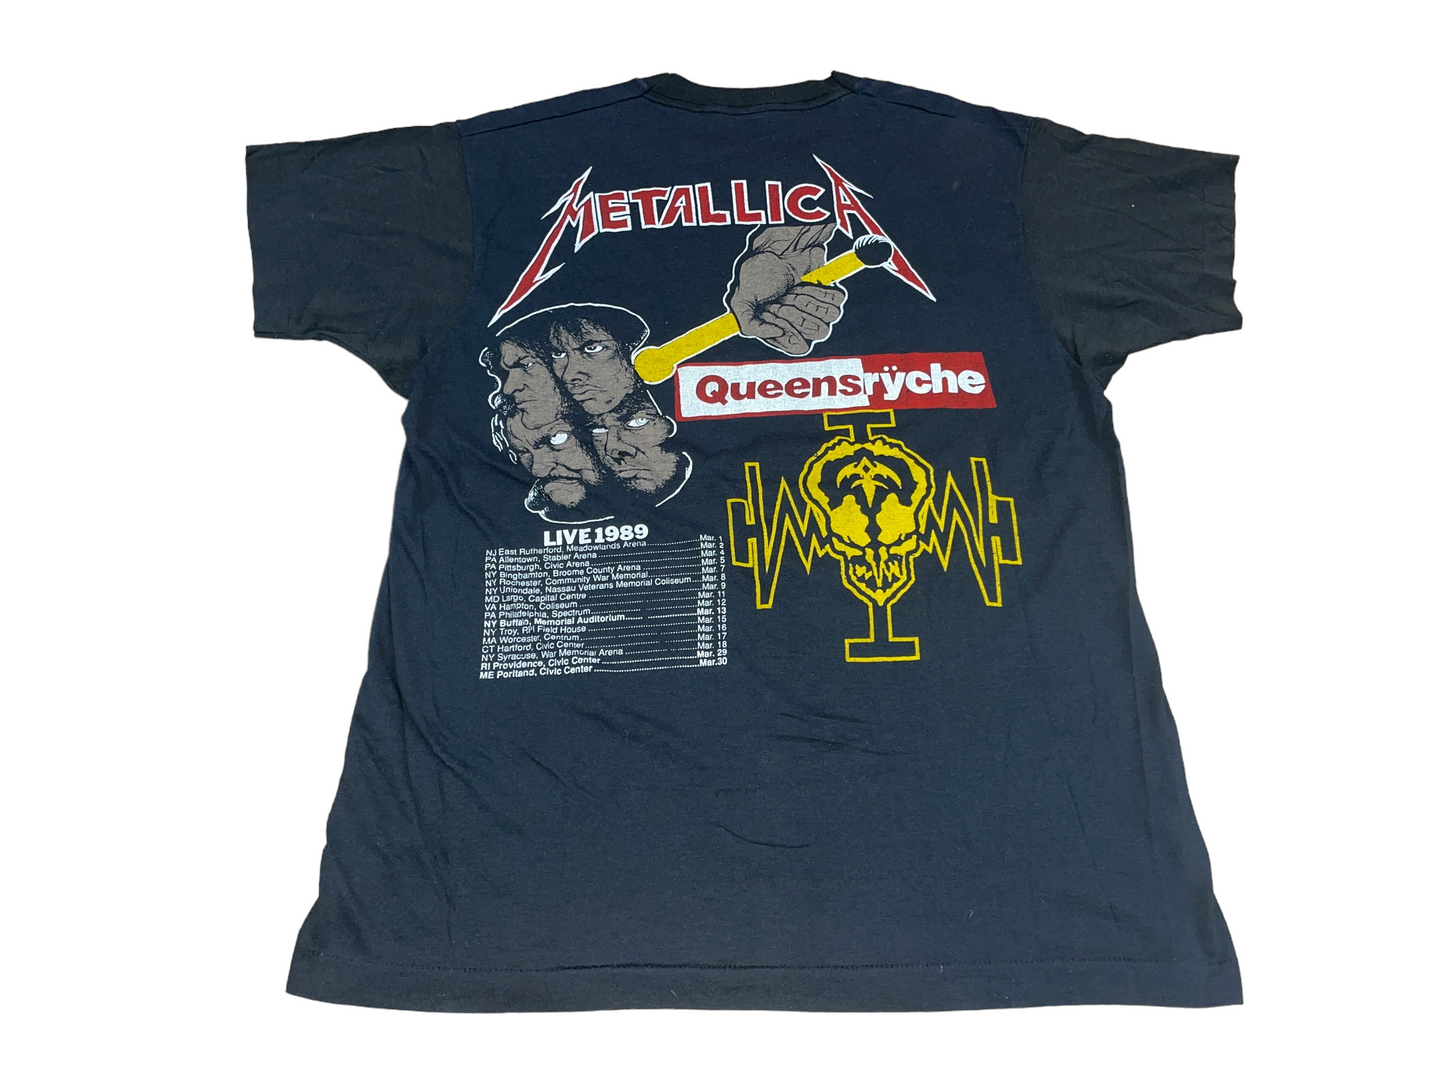 Vintage 1989 Metallica And Justice For All Tour T-Shirt